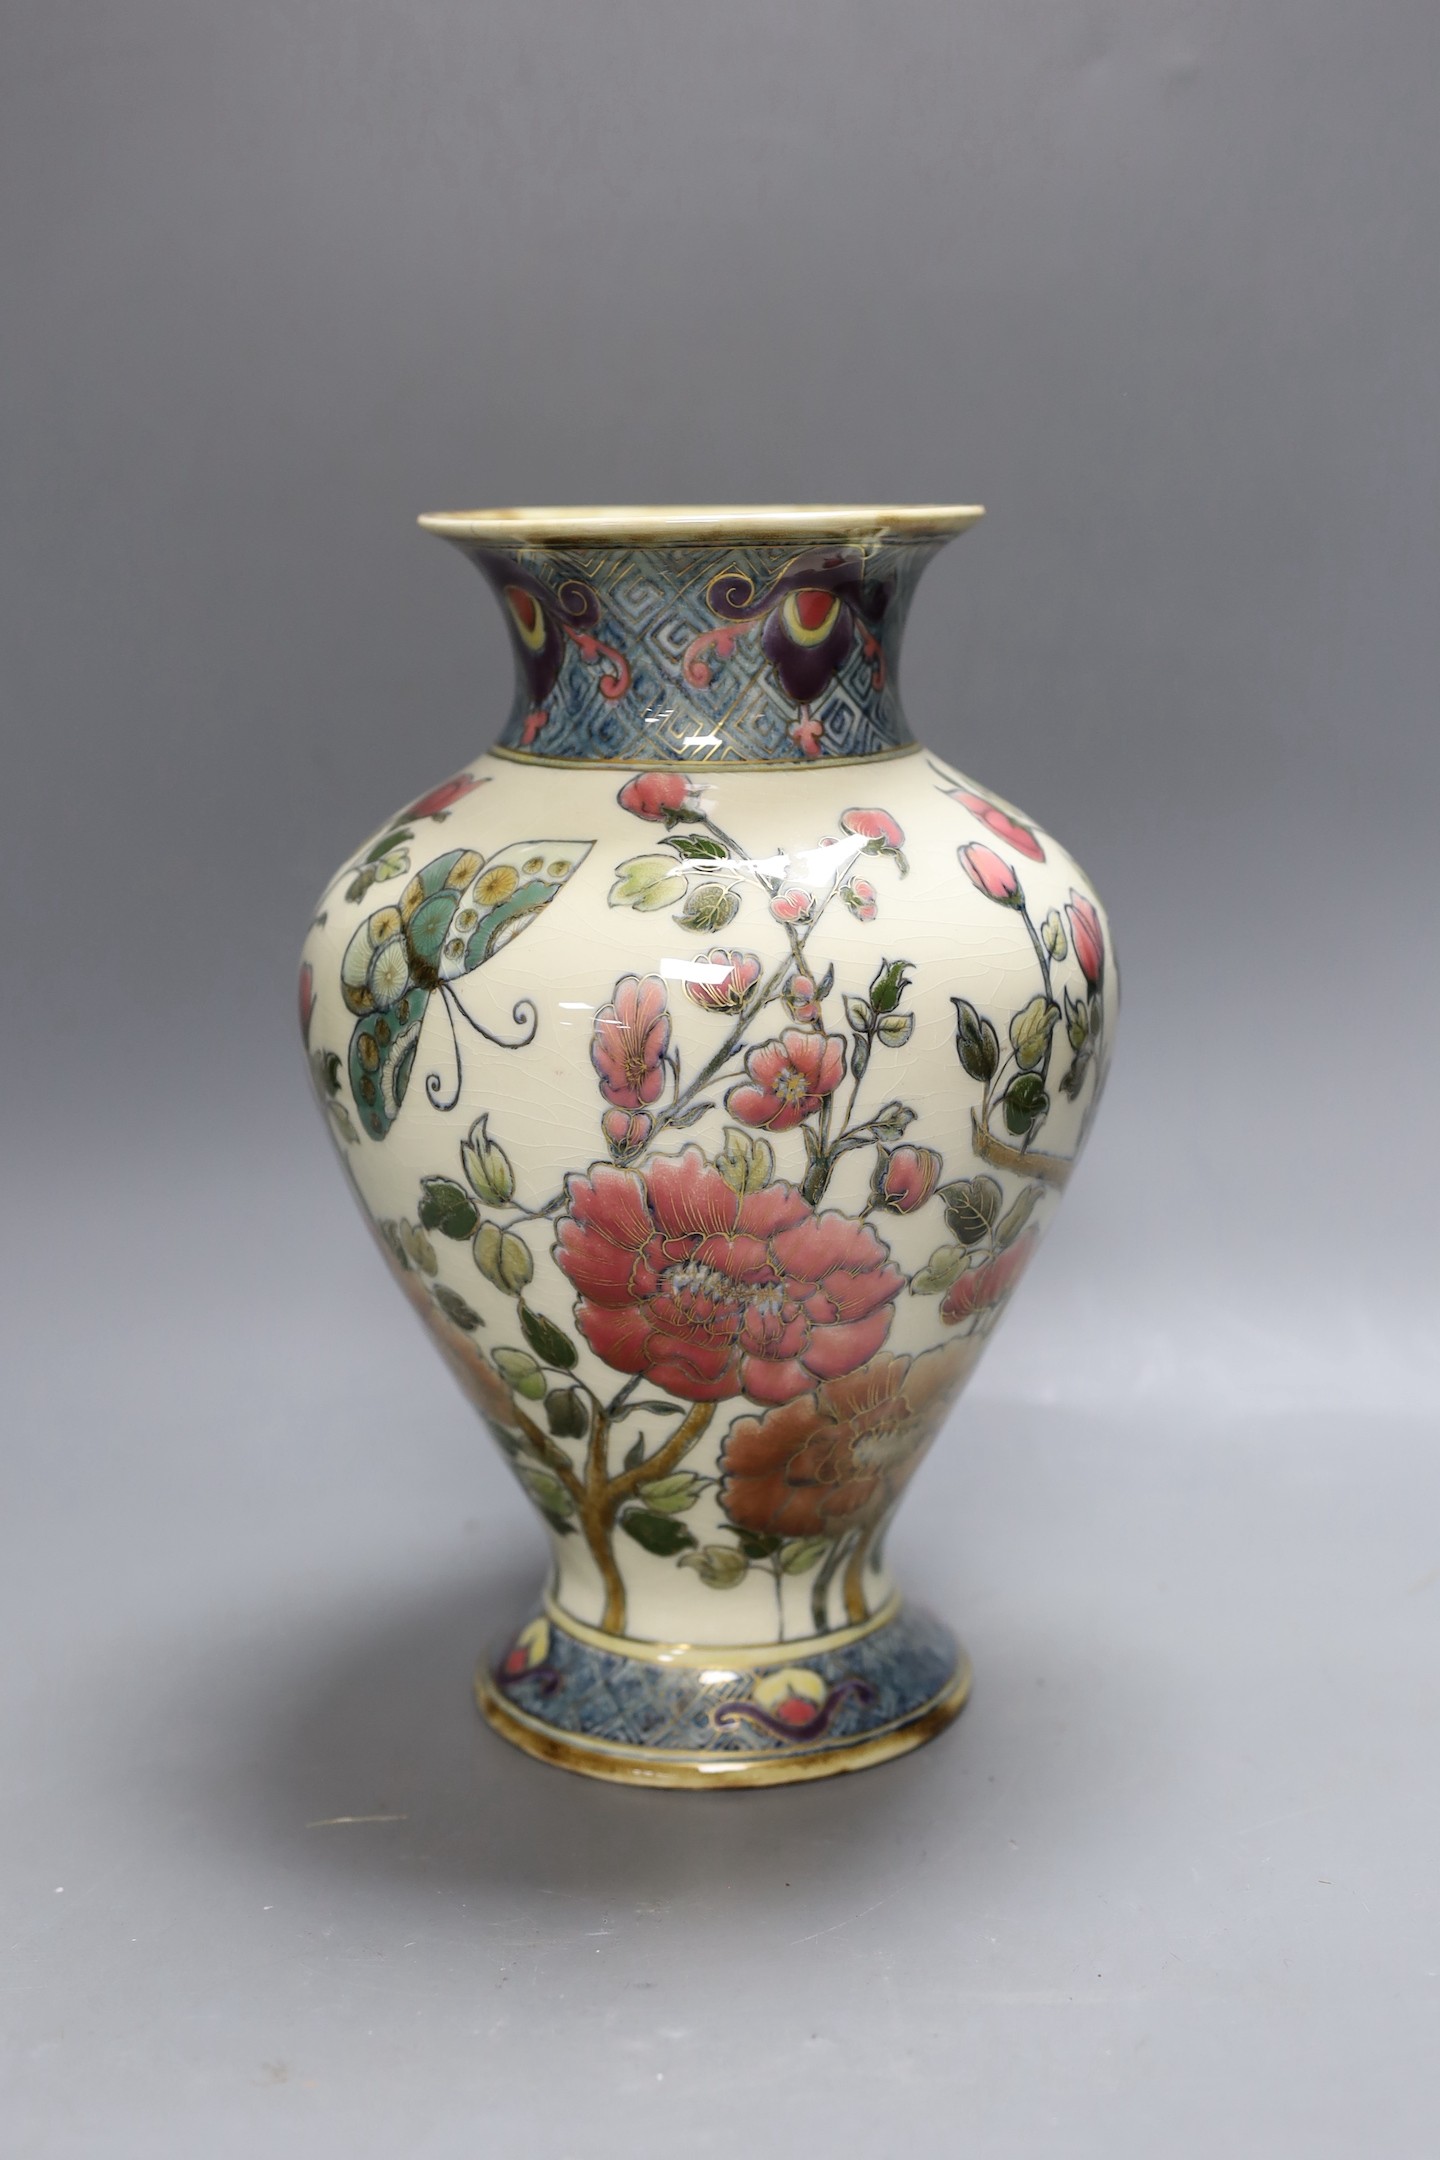 An early 20th century Zsolnay Persian style pottery vase. 26cm tall